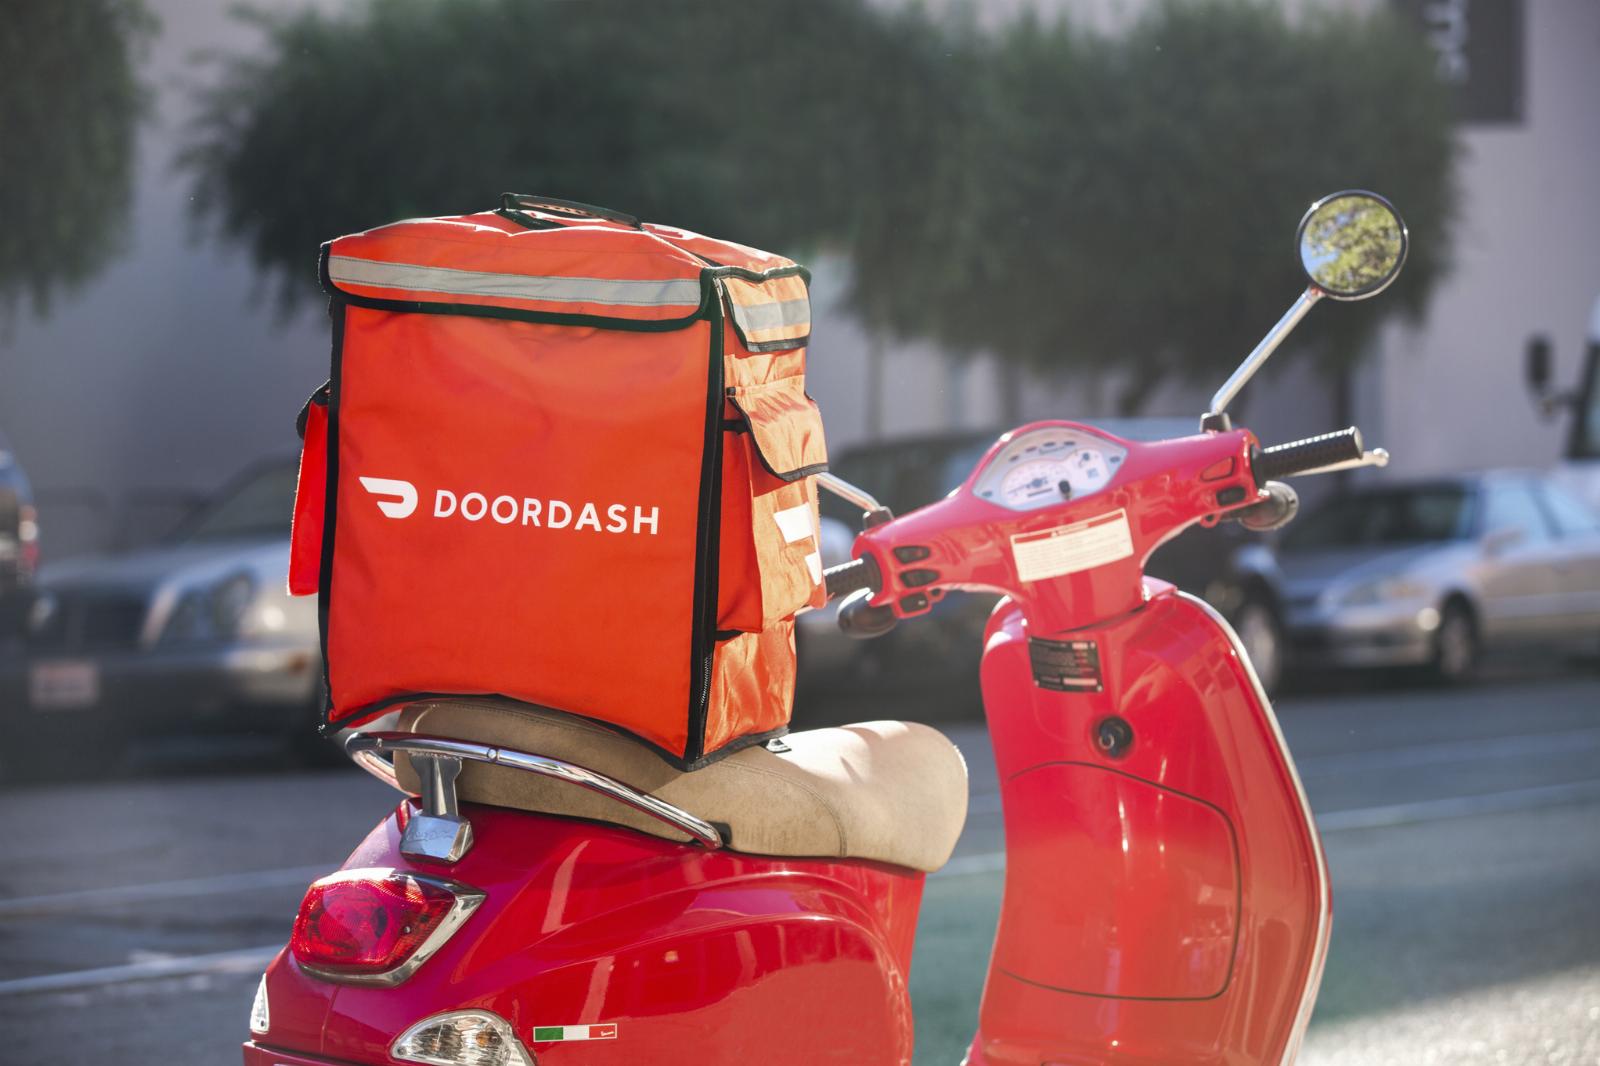 DoorDash introduces new safety features for riders including reduced notifications